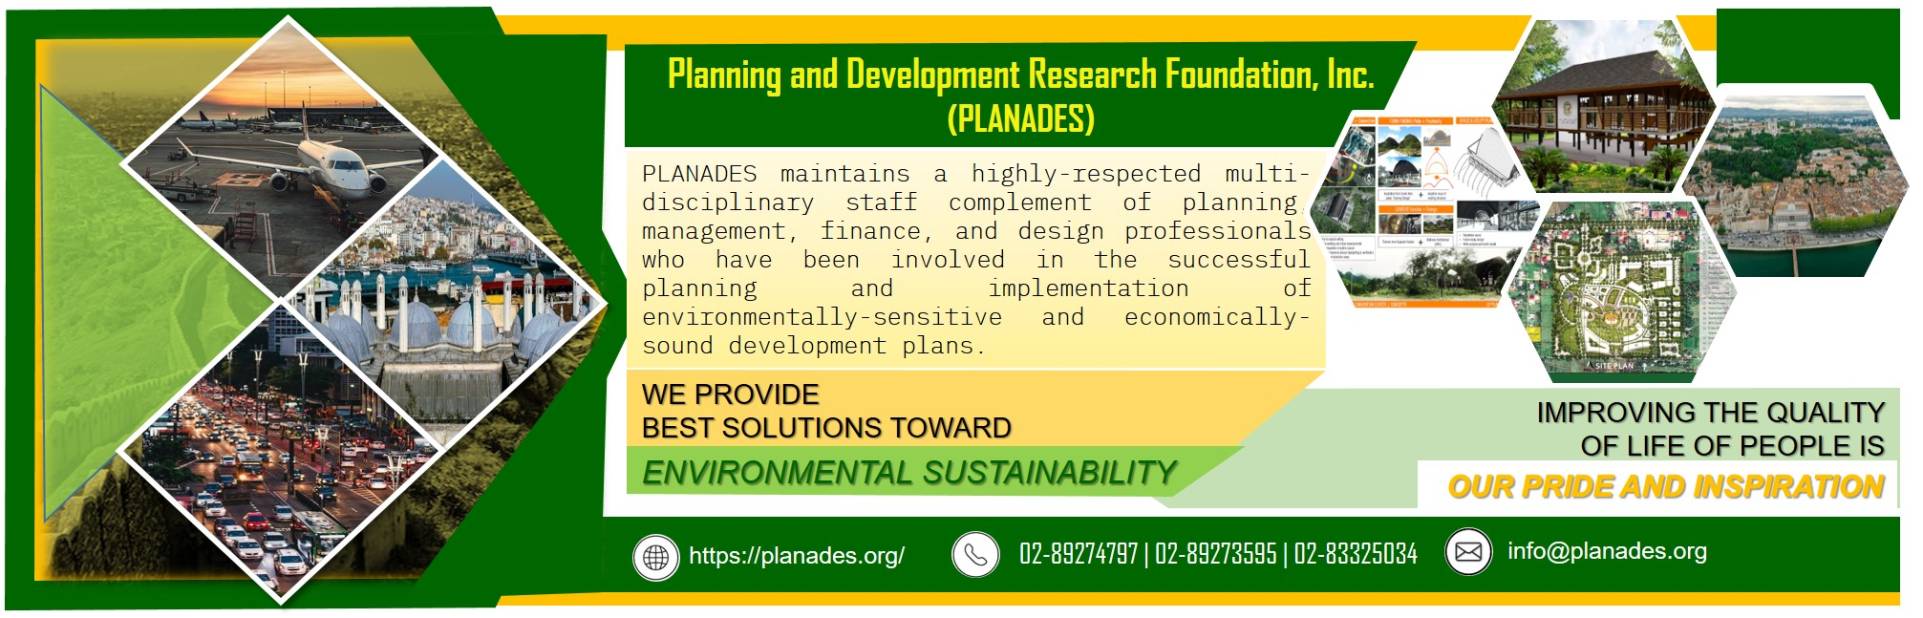  (U.P. Planning and Development Research Foundation, Inc. (UP PLANADES) 